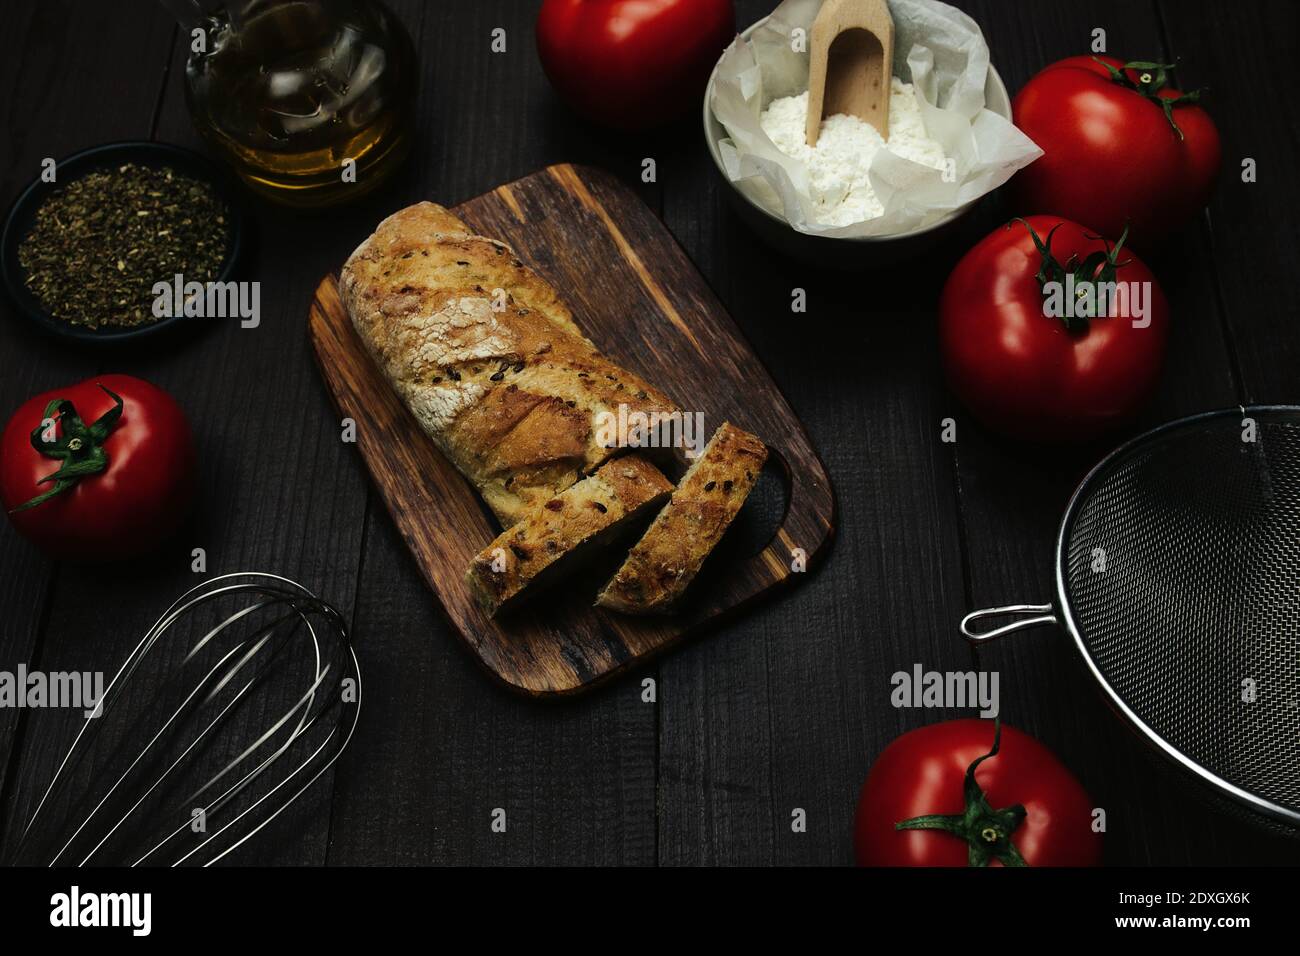 Fresh baked bread and baking ingredients on a table  Stock Photo